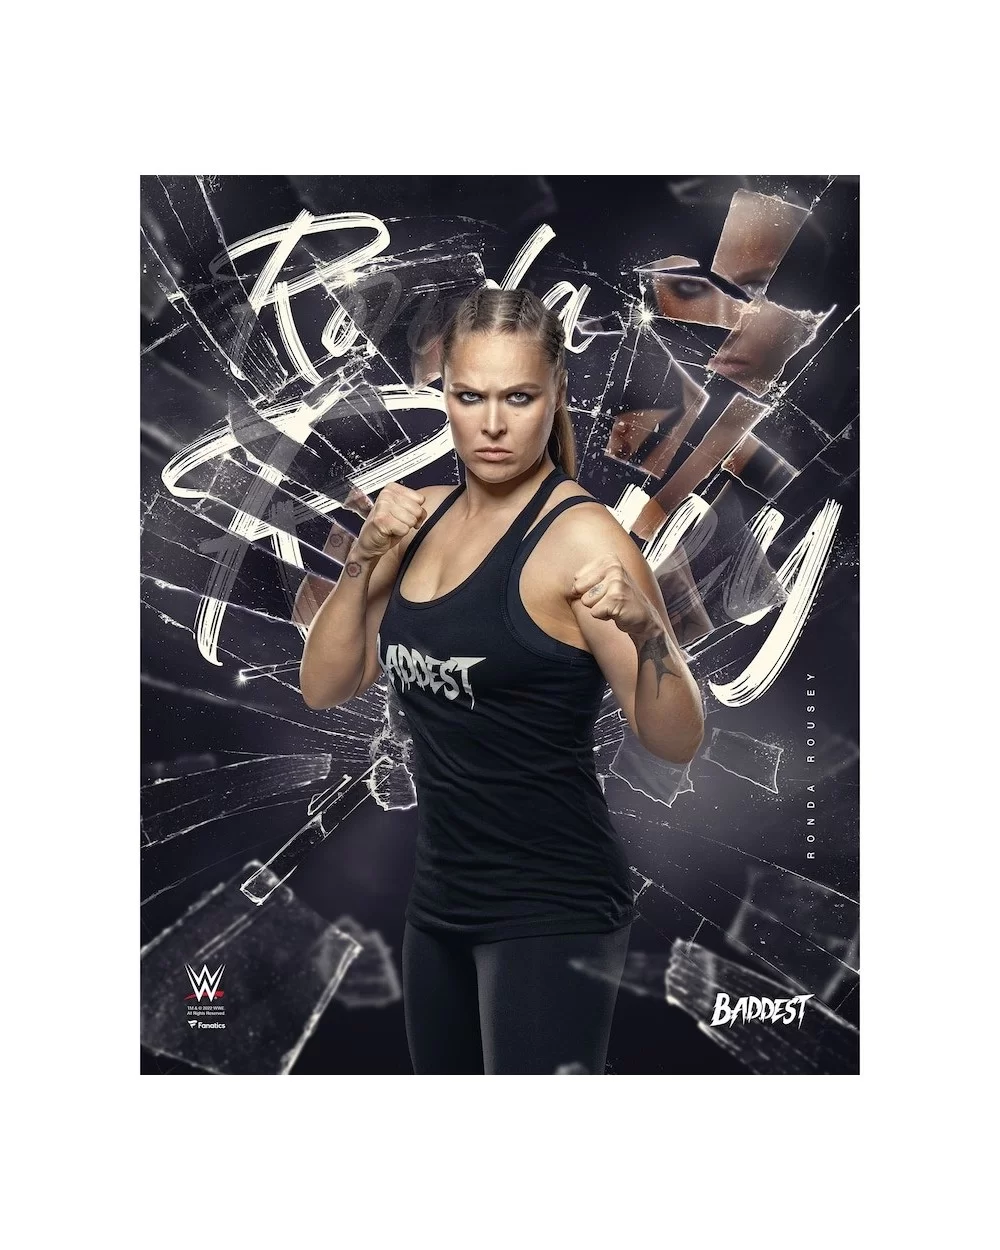 Ronda Rousey Unsigned 16" x 20" Shattered Photograph $9.00 Home & Office